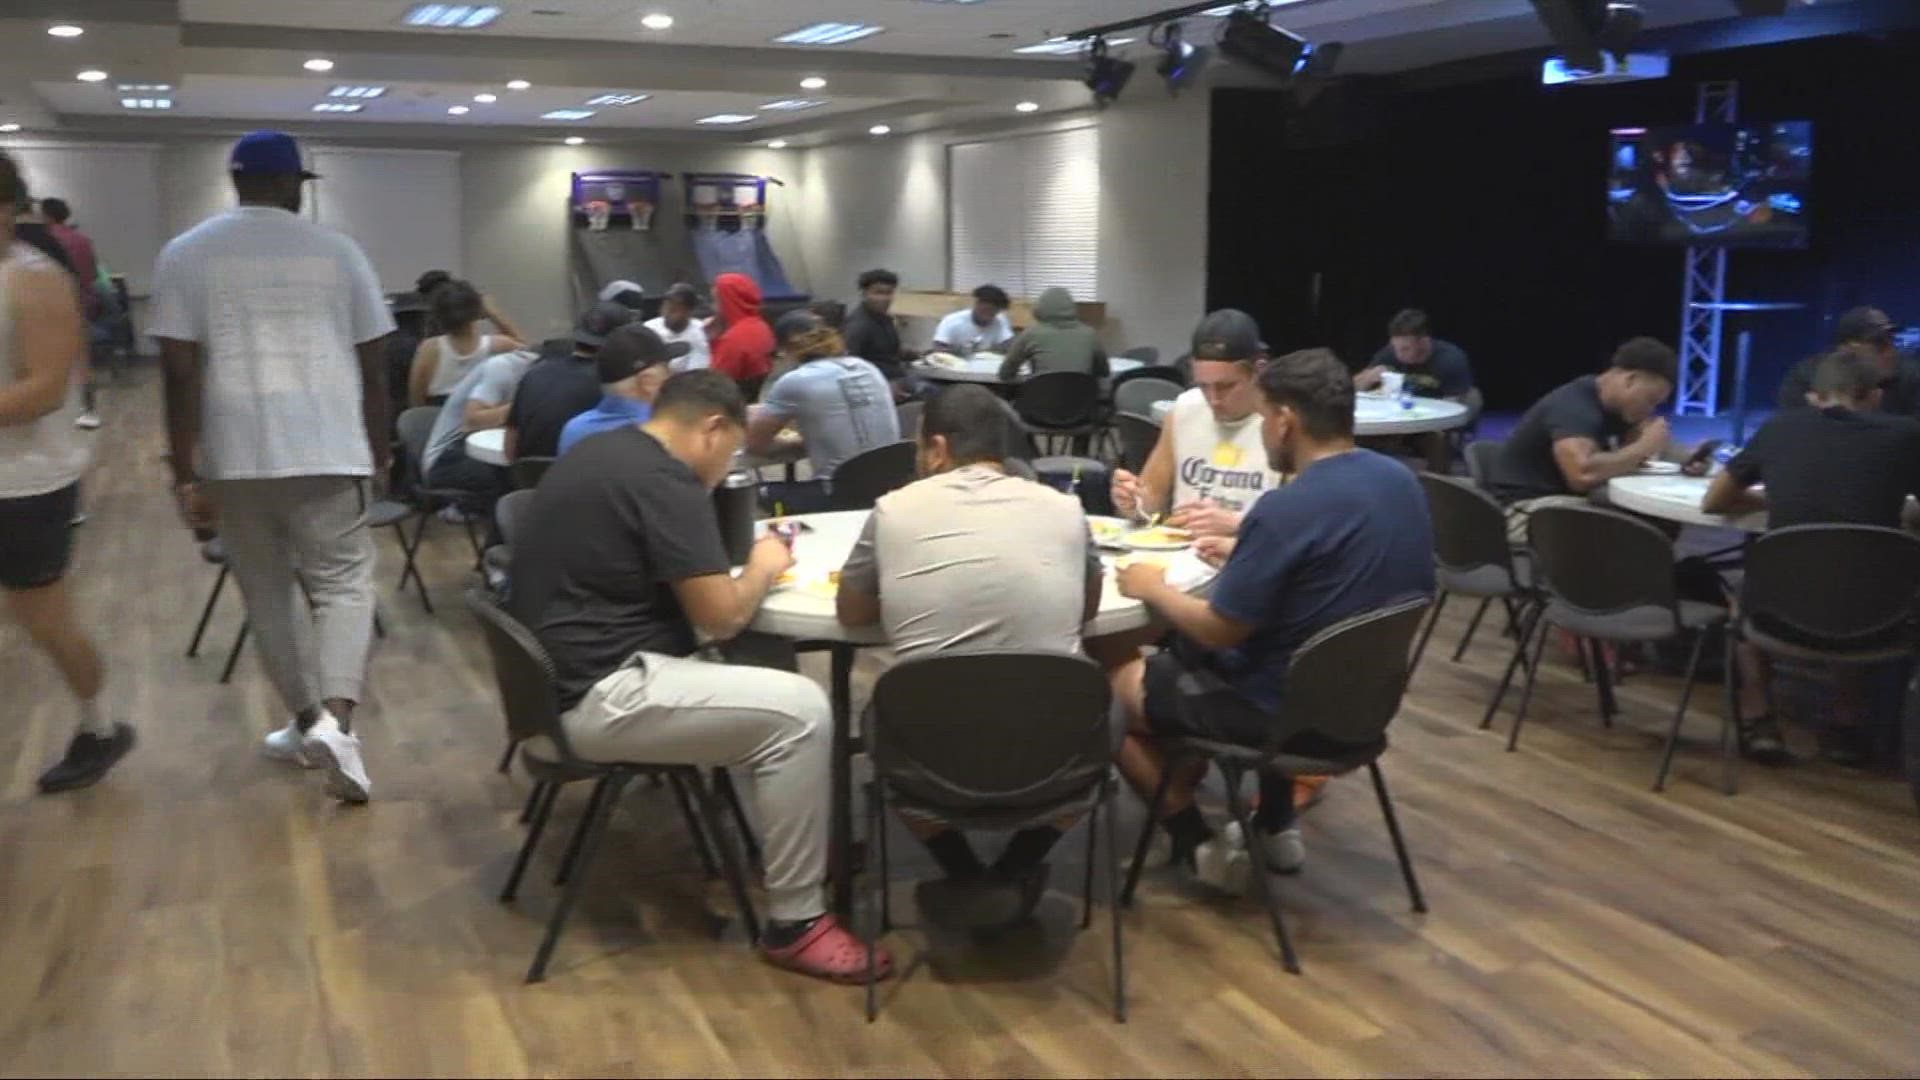 Sierra College's football team is rocking the league this season. The players build bonds off the field with weekly dinners.